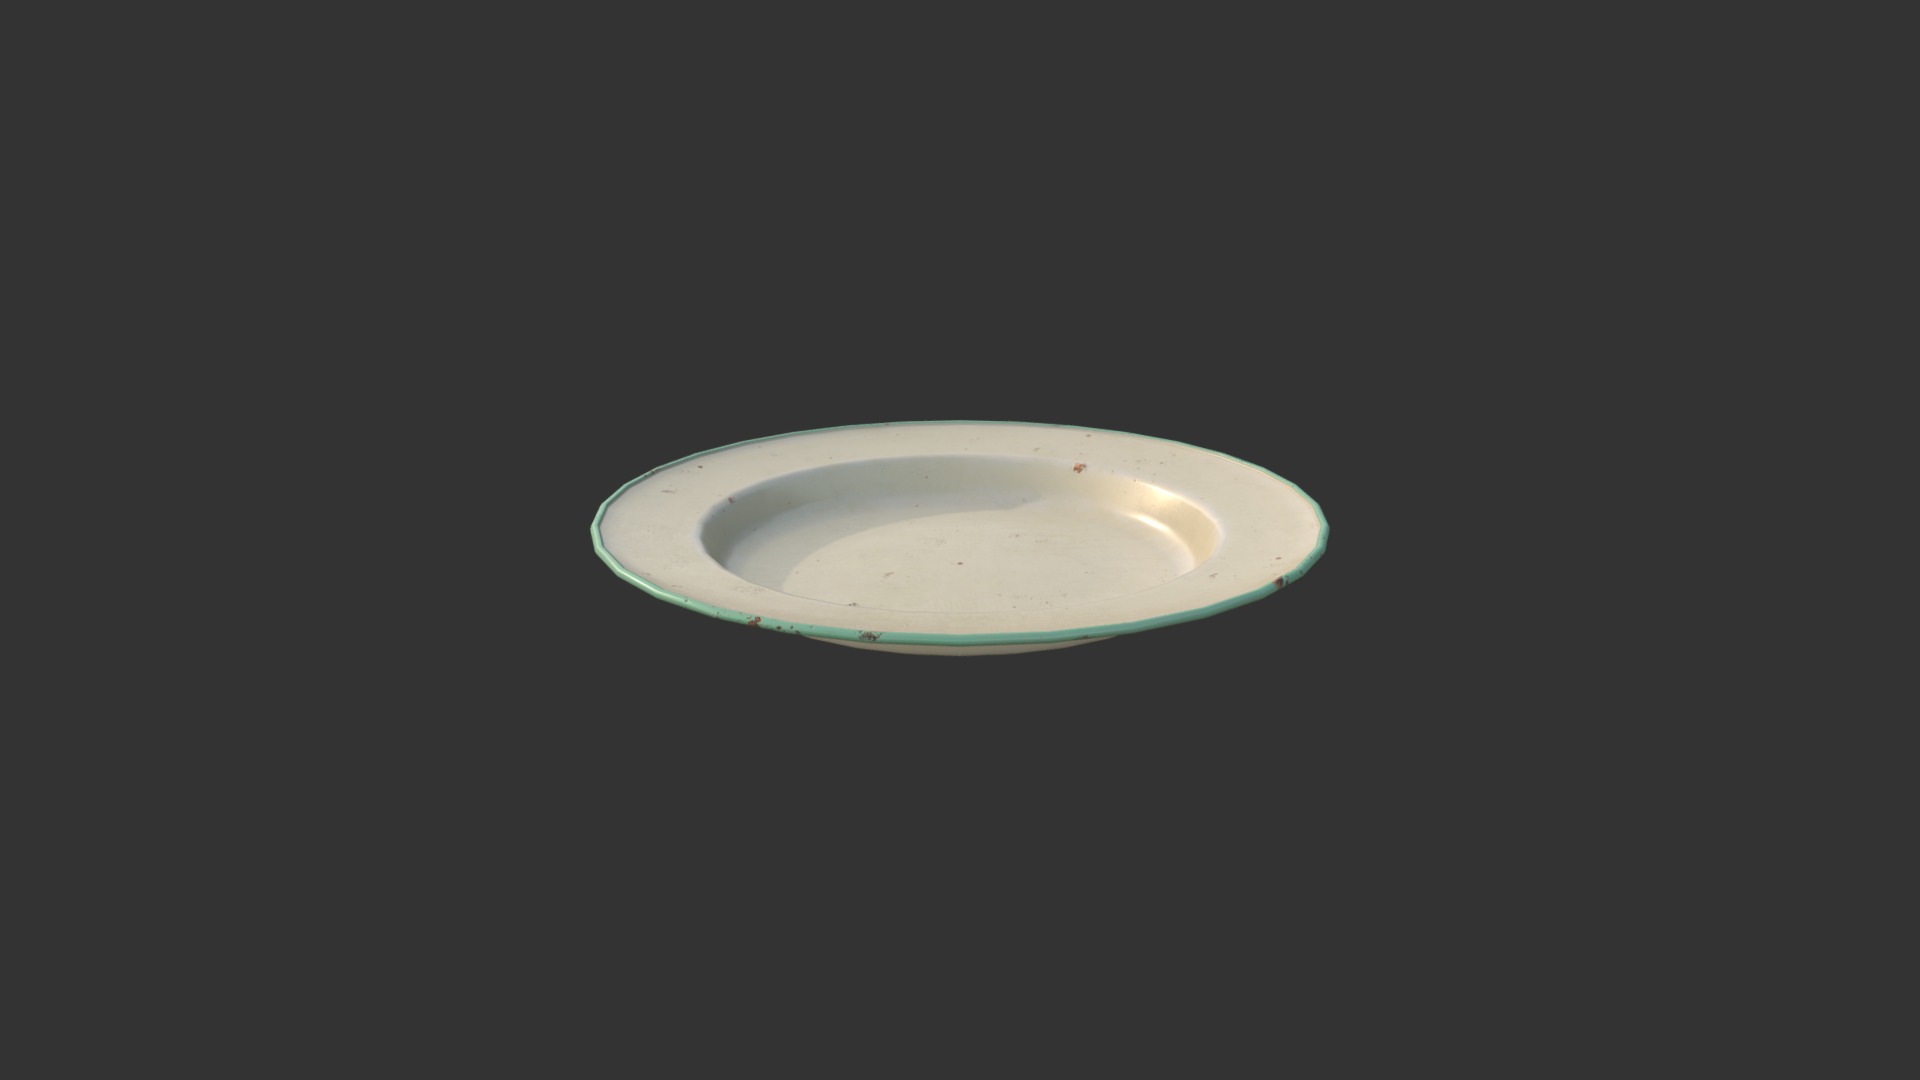 3D model Rusty plate - This is a 3D model of the Rusty plate. The 3D model is about a white plate with a green circle on it.